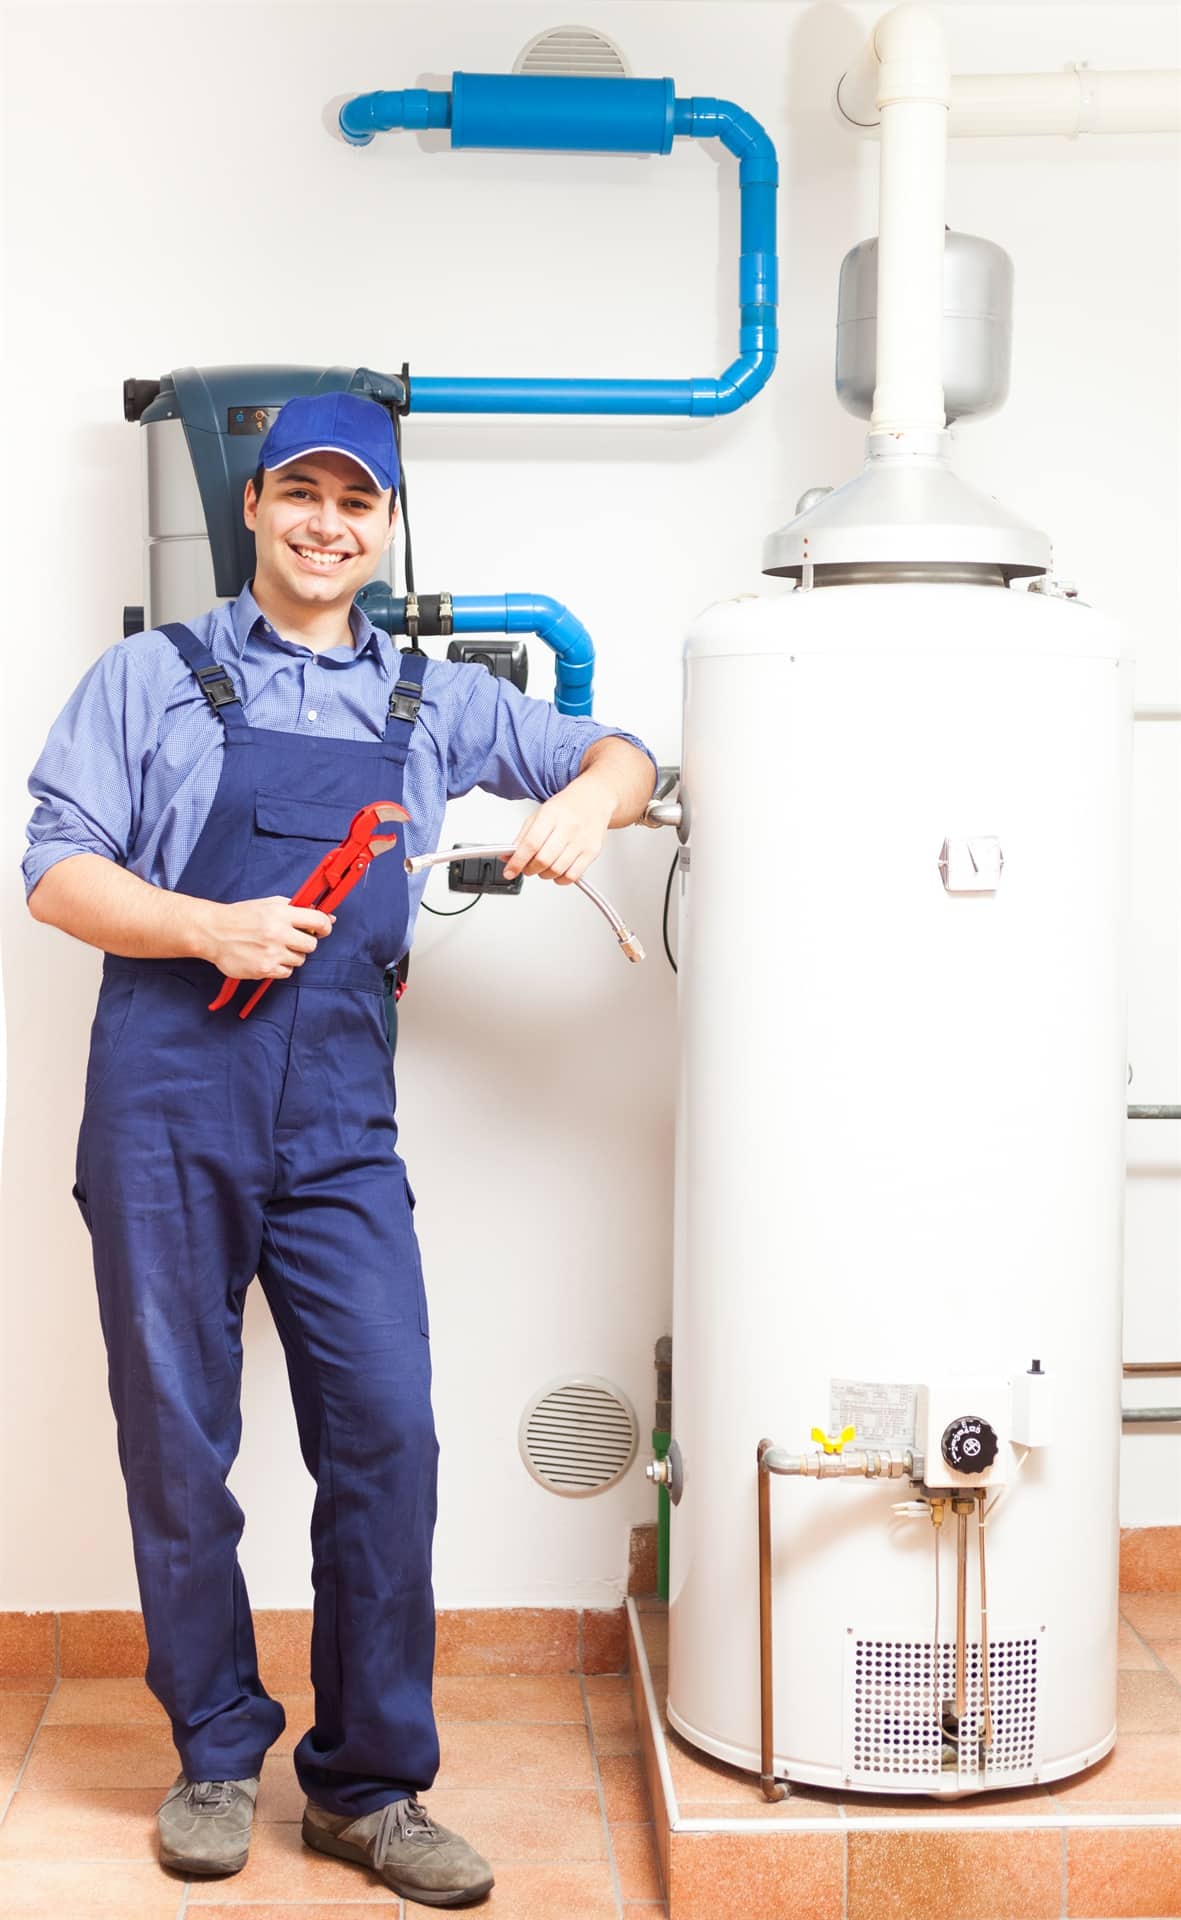 storage tank water heater installation and repair provided by Wrench It Up plumbing and mechanical